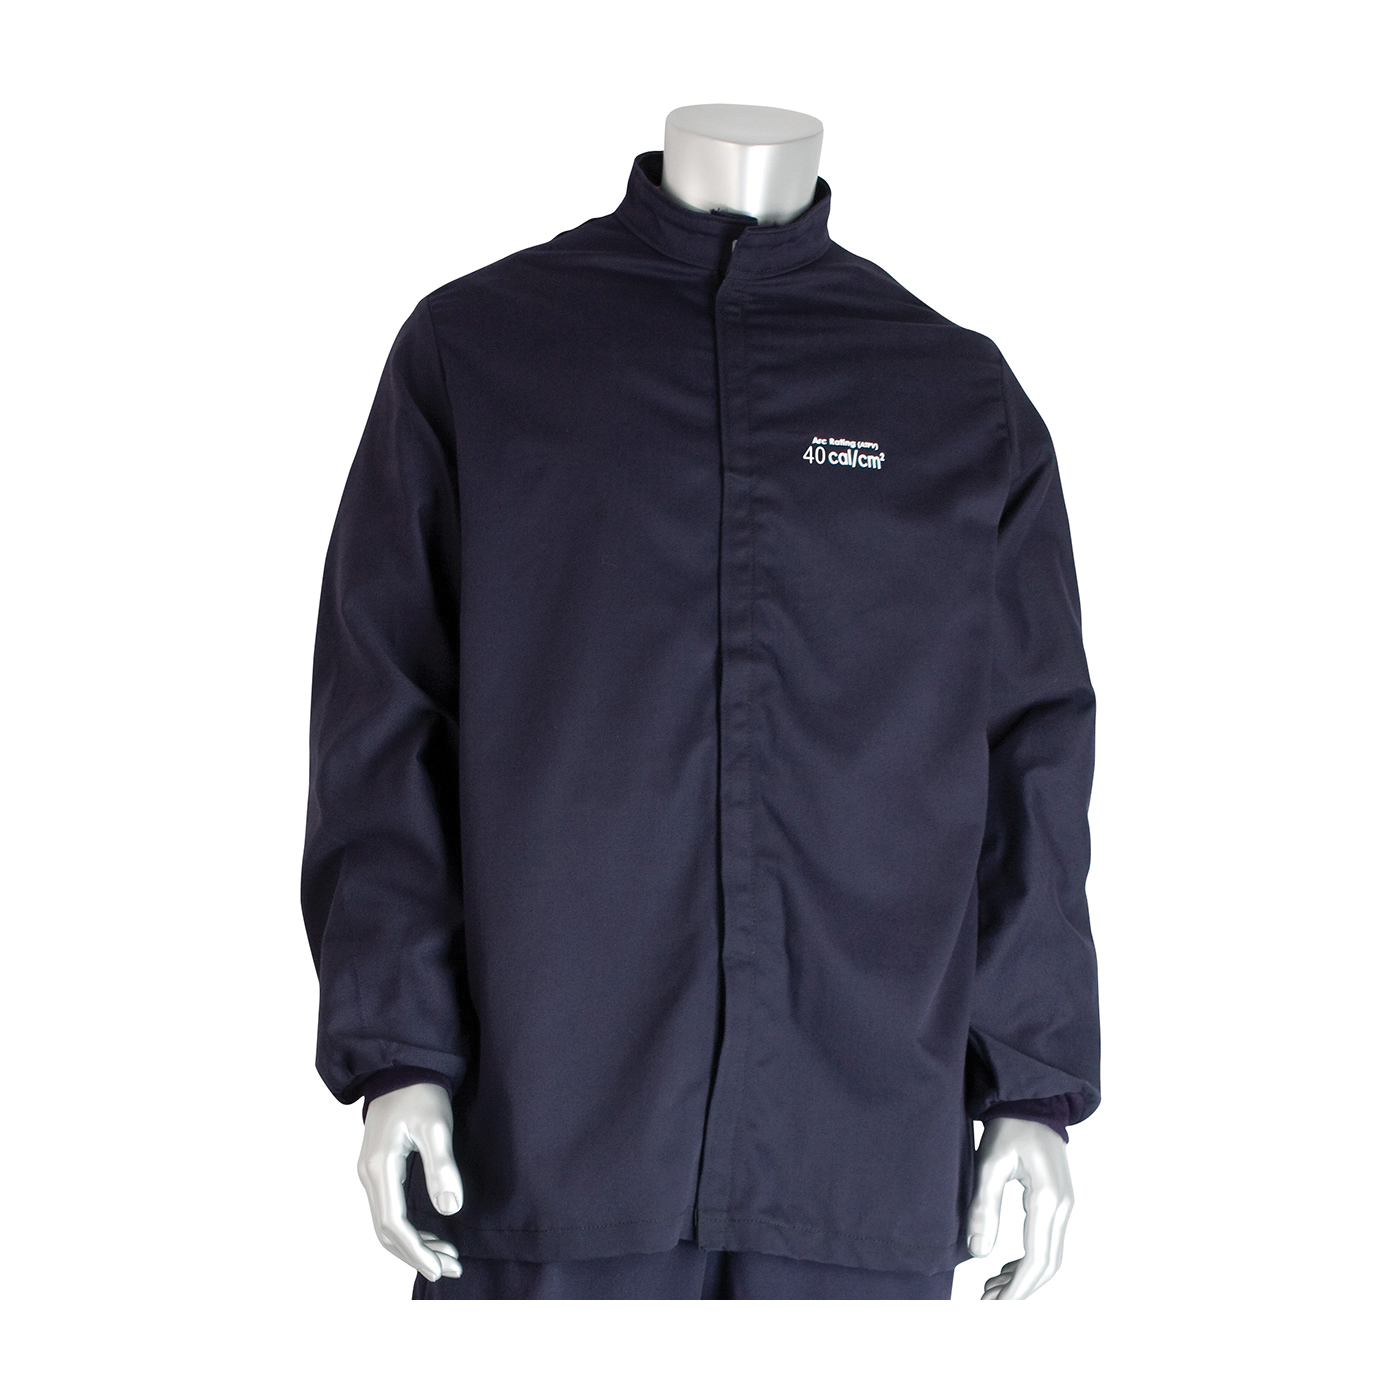 PIP® 9100-52412/4X Arc and Flame Resistant Jacket, 4XL, Navy, Westex® UltraSoft® 88% Cotton 12% High Tenacity Nylon, 60 to 62 in Chest, Resists: Arc and Flame, ASTM F1506-10a, ASTM F2178-12